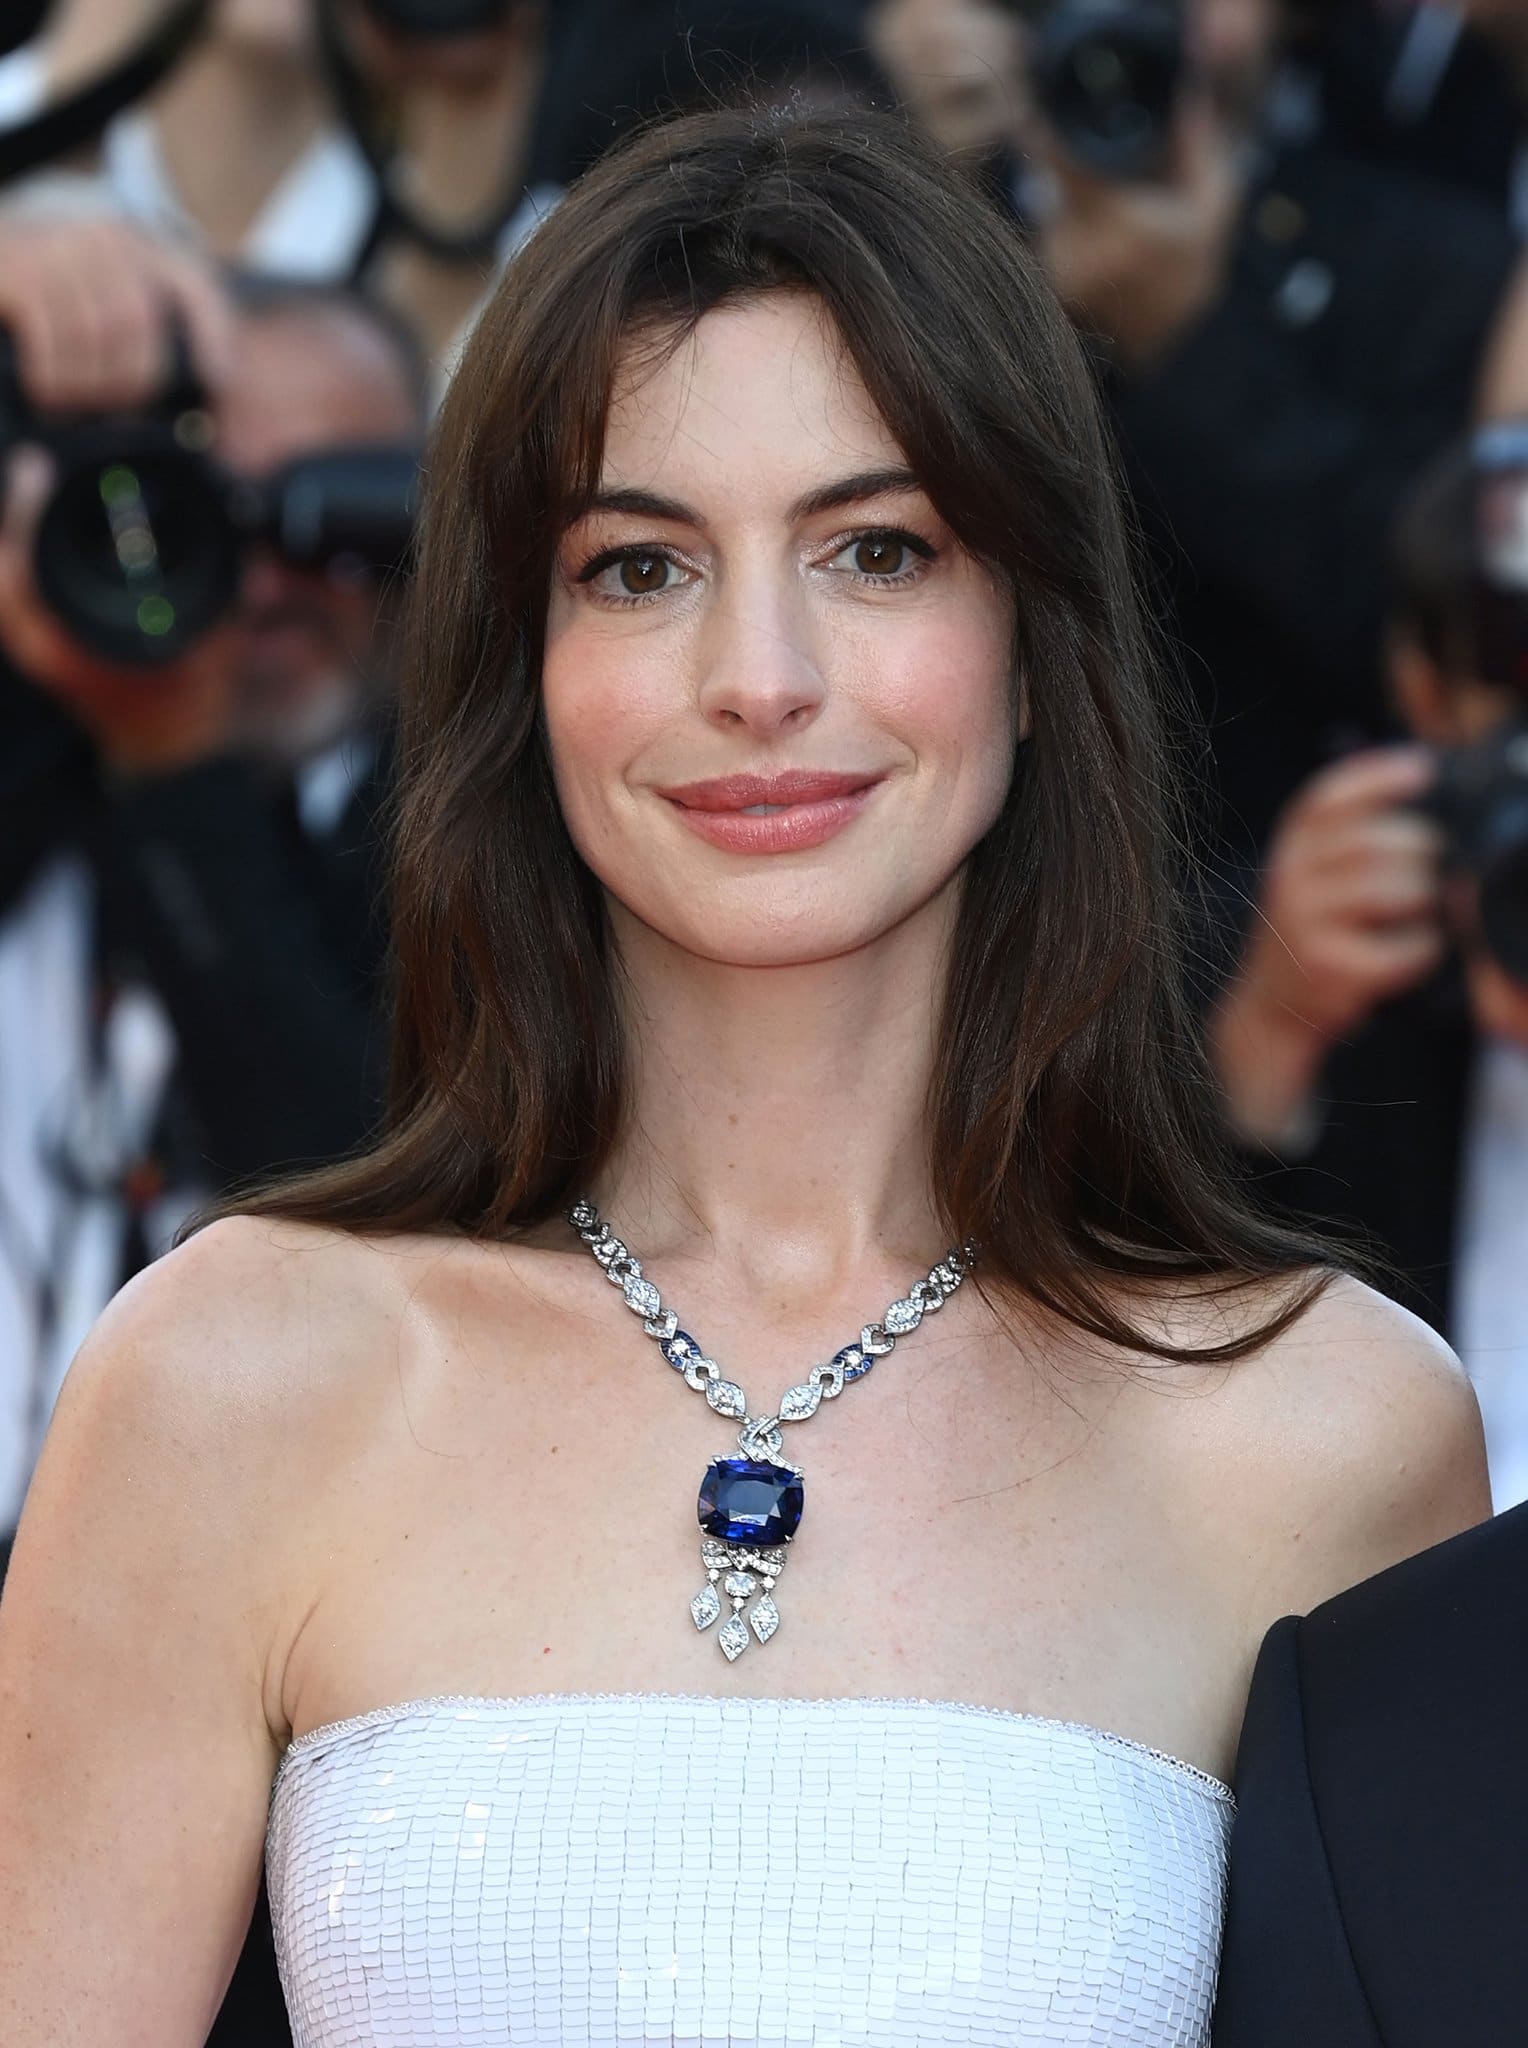 Anne Hathaway wears her chocolate brown tresses down and highlights her features with eyeliner and pink lipstick